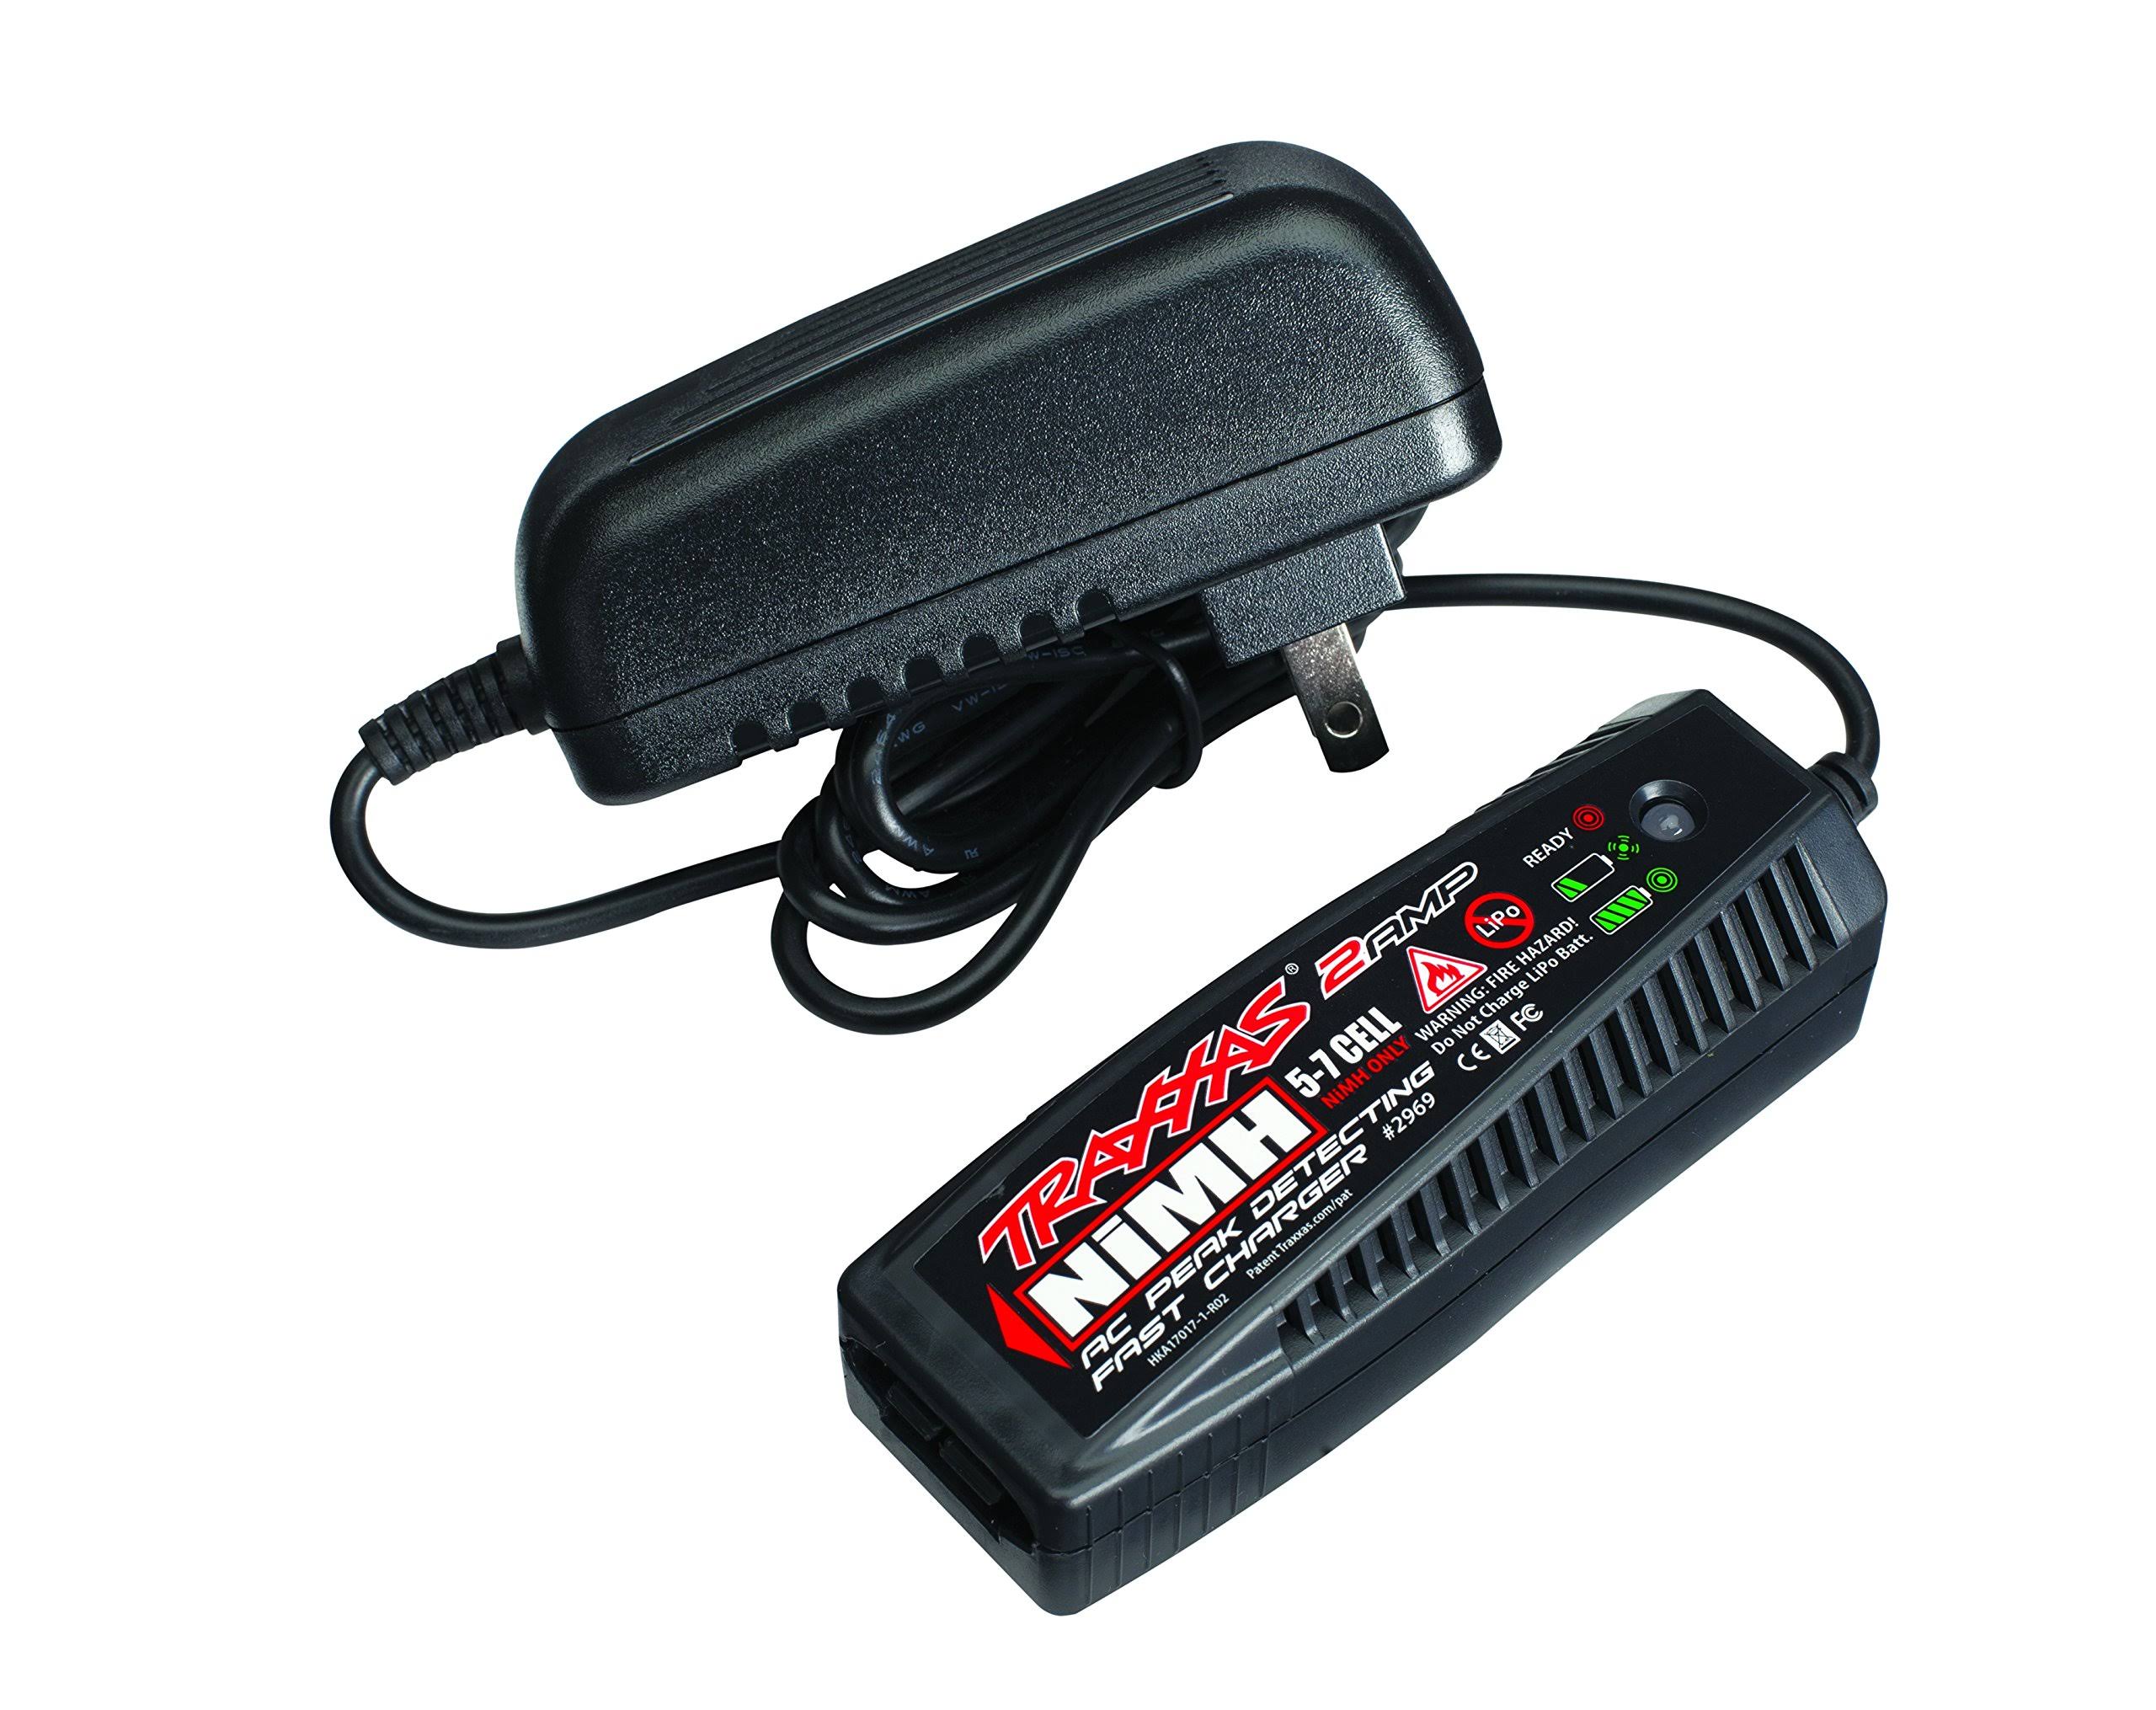 Traxxas 2-amp AC Peak-Detecting 5-7 Cell NiMH Battery Fast Charger Vehicle